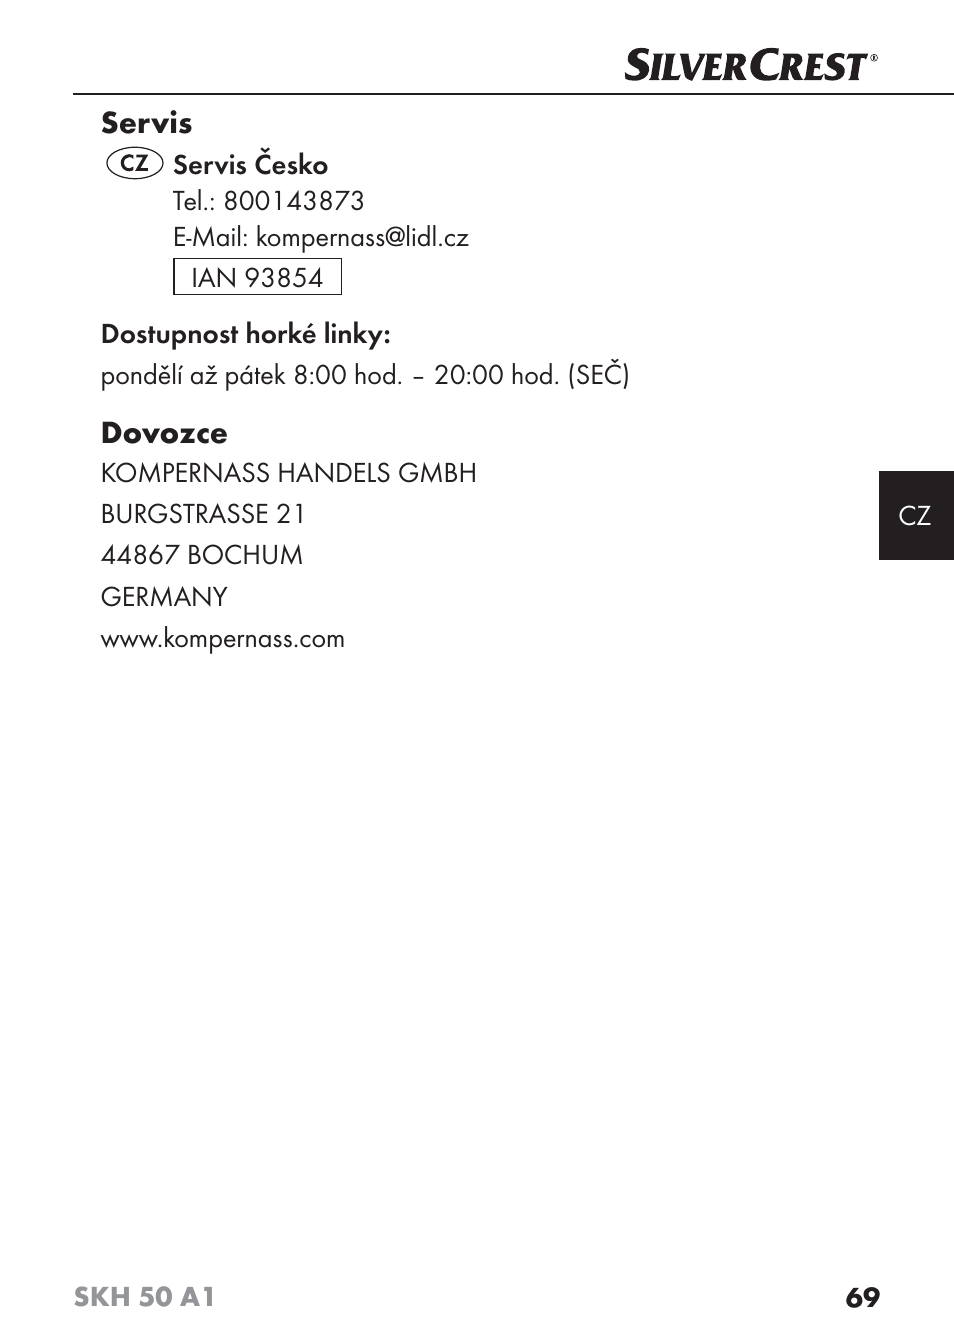 Servis, Dovozce | Silvercrest SKH 50 A1 User Manual | Page 72 / 101